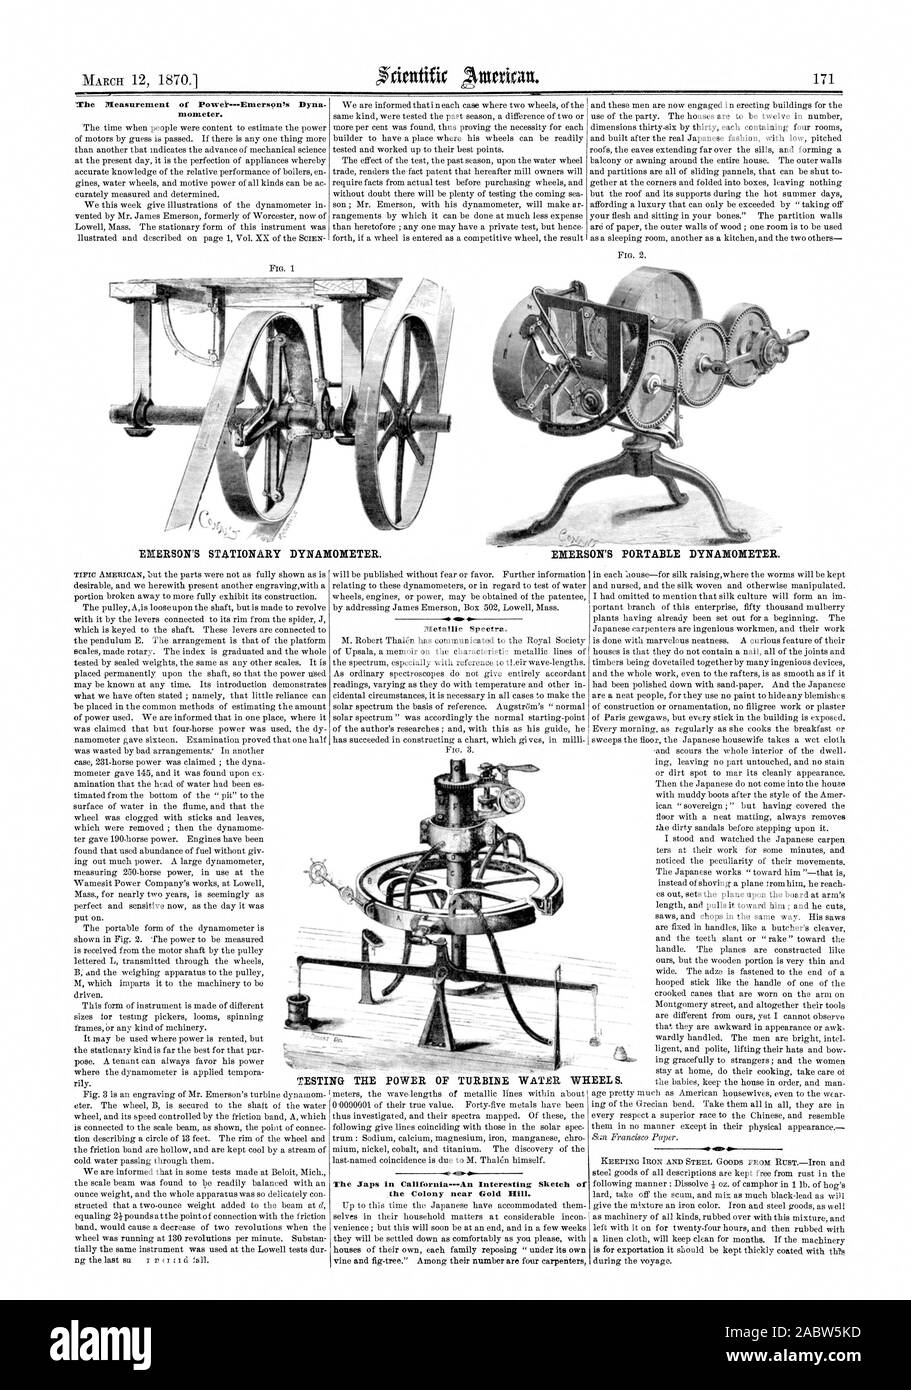 mometer. EMERSON'S STATIONARY DYNAMOMETER. EMERSON'S PORTABLE DYNAMOMETER. Metallic Spectra. . The Japs in California--An Interesting Sketch of the Colony near Gold Hill., scientific american, 70-03-12 Stock Photo